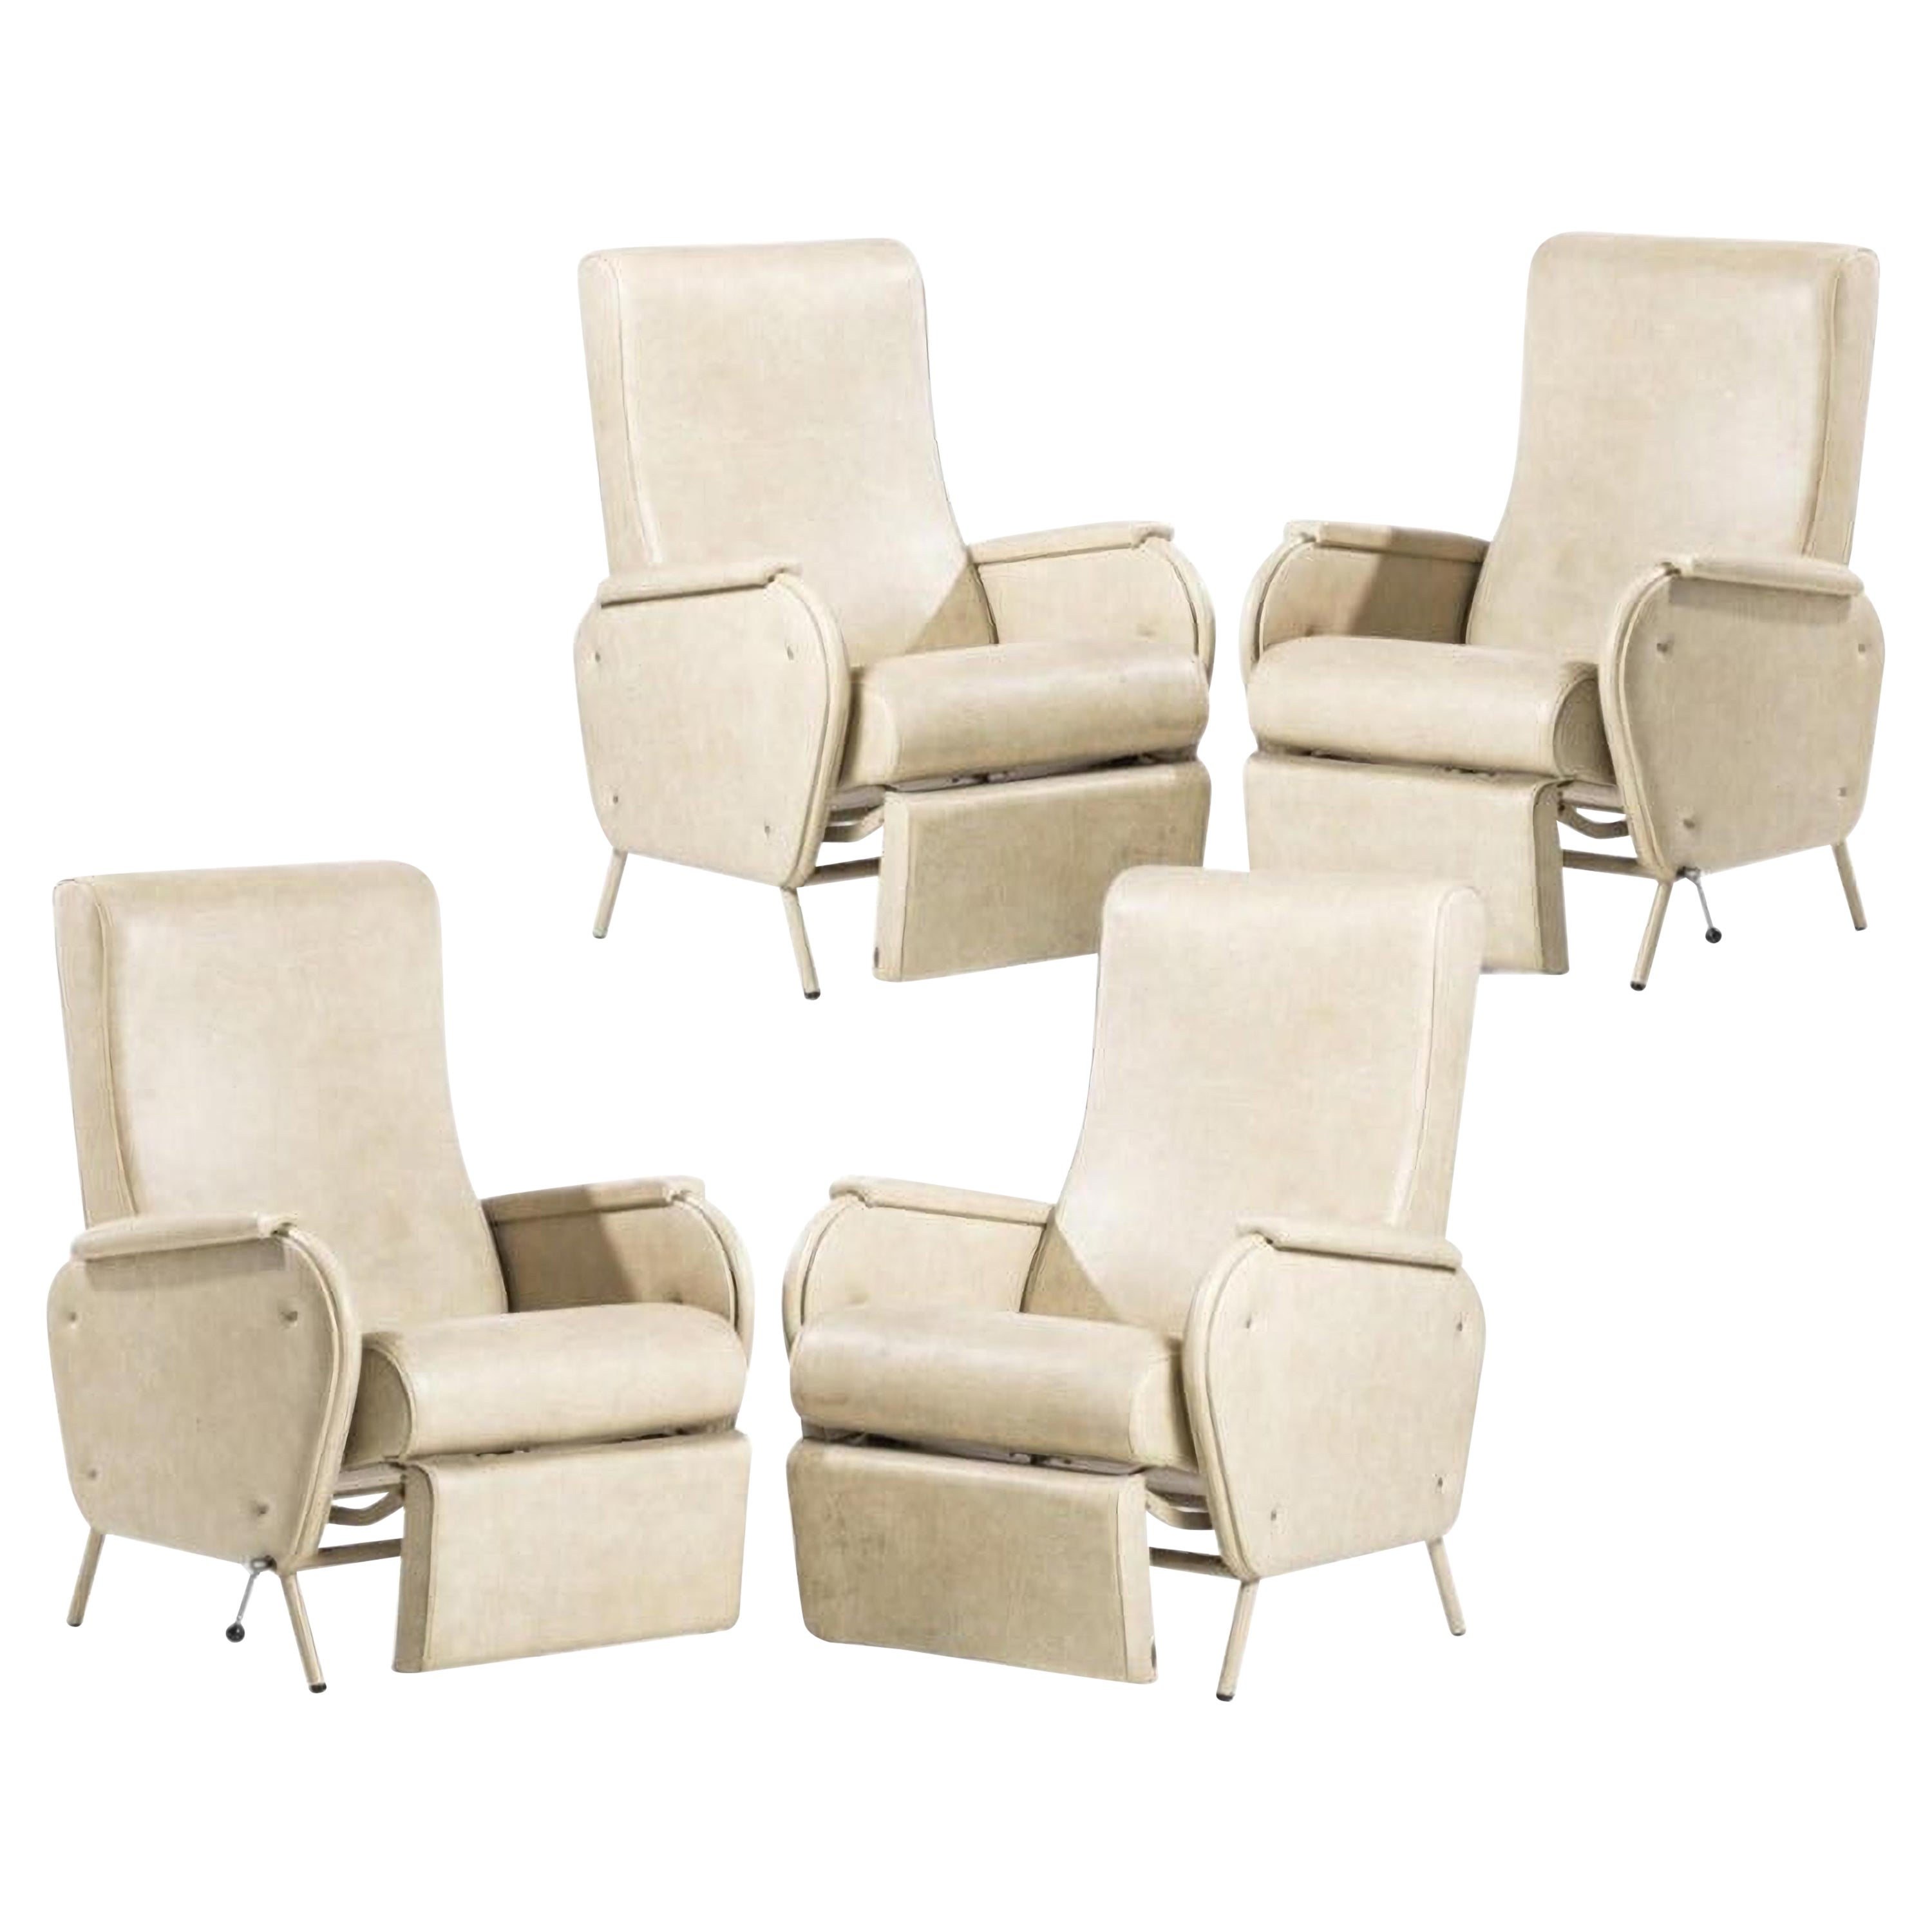 French Set of Four Art Deco Chairs, Early 20th Century For Sale